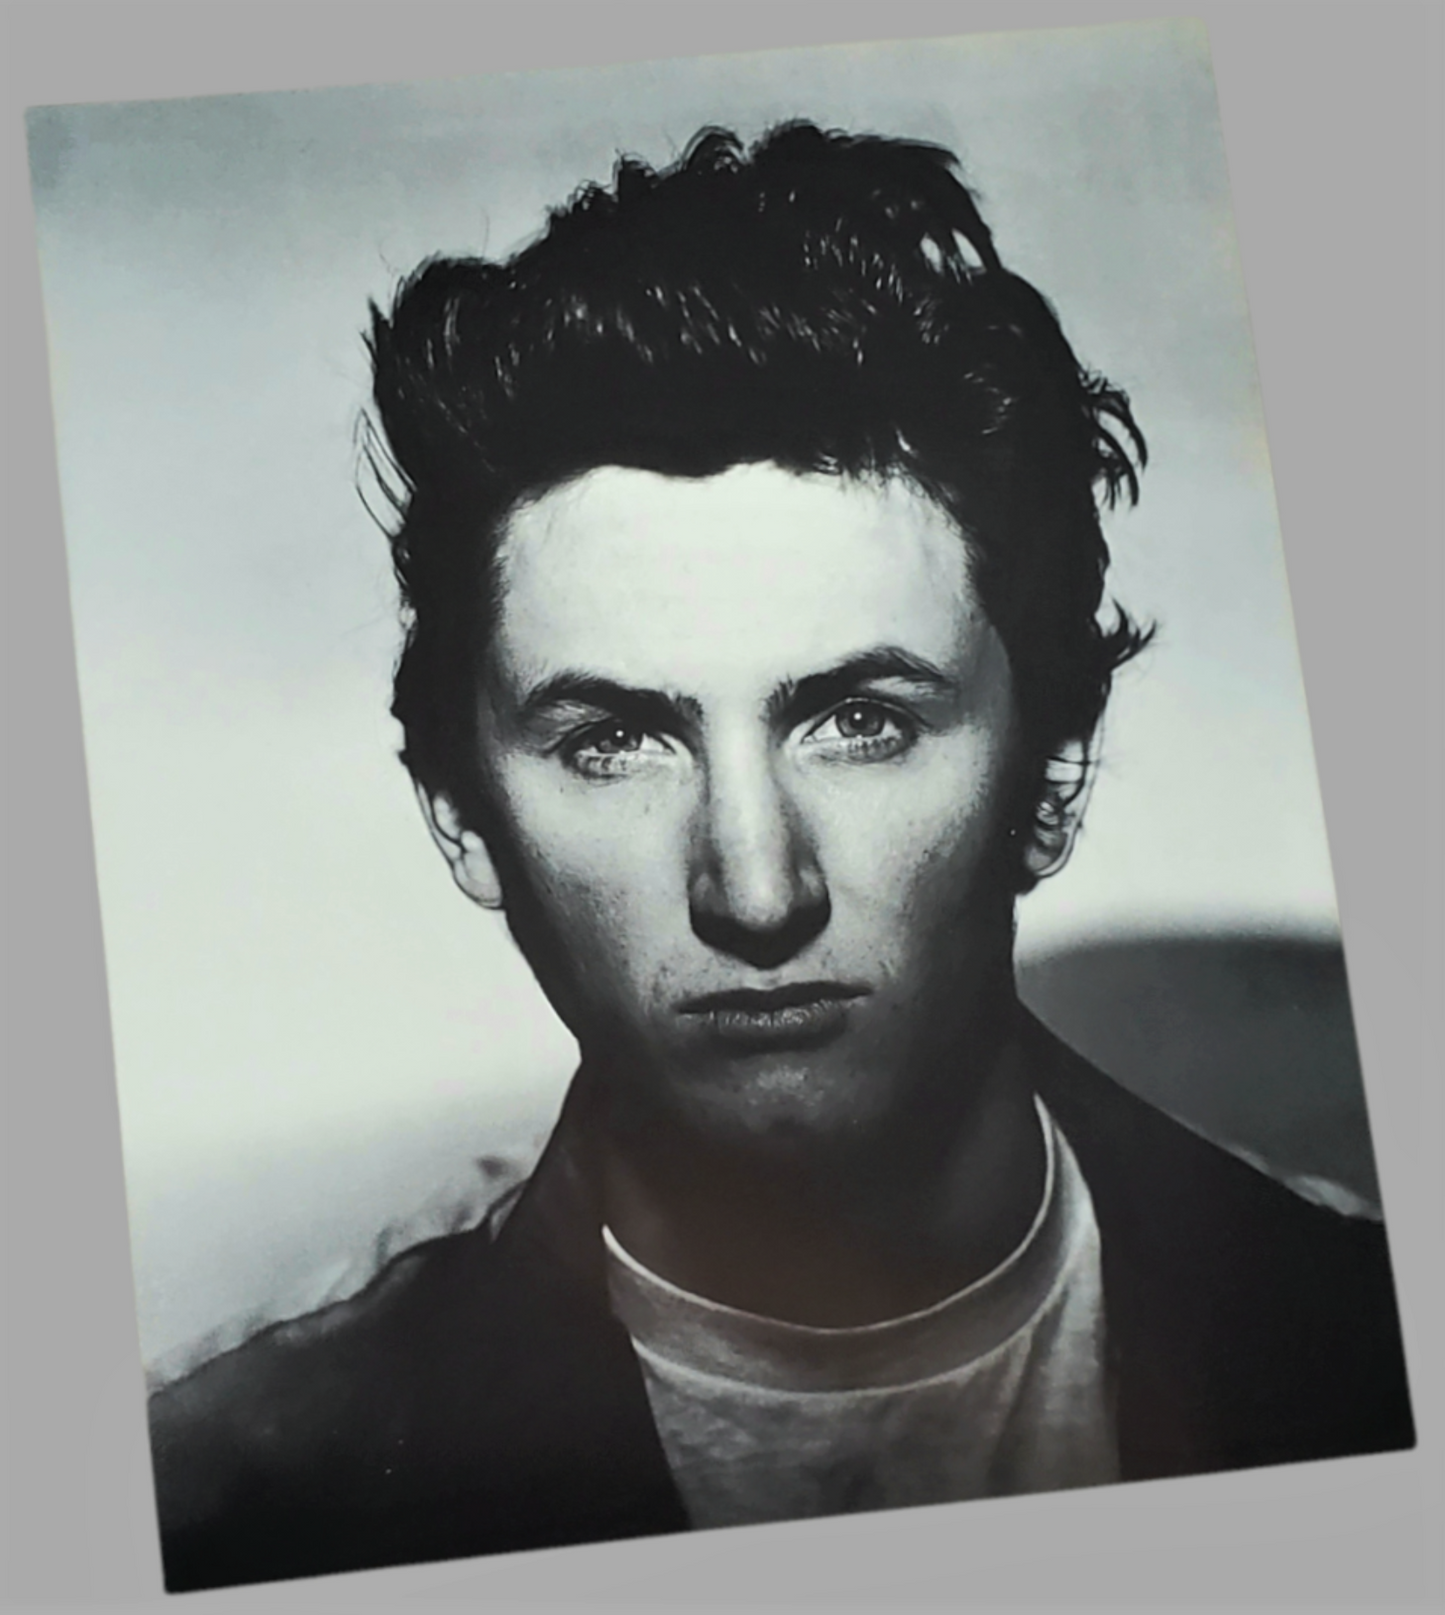 Sean Penn Vintage Photograph For Sale In AREA51GALLERY New Orleans